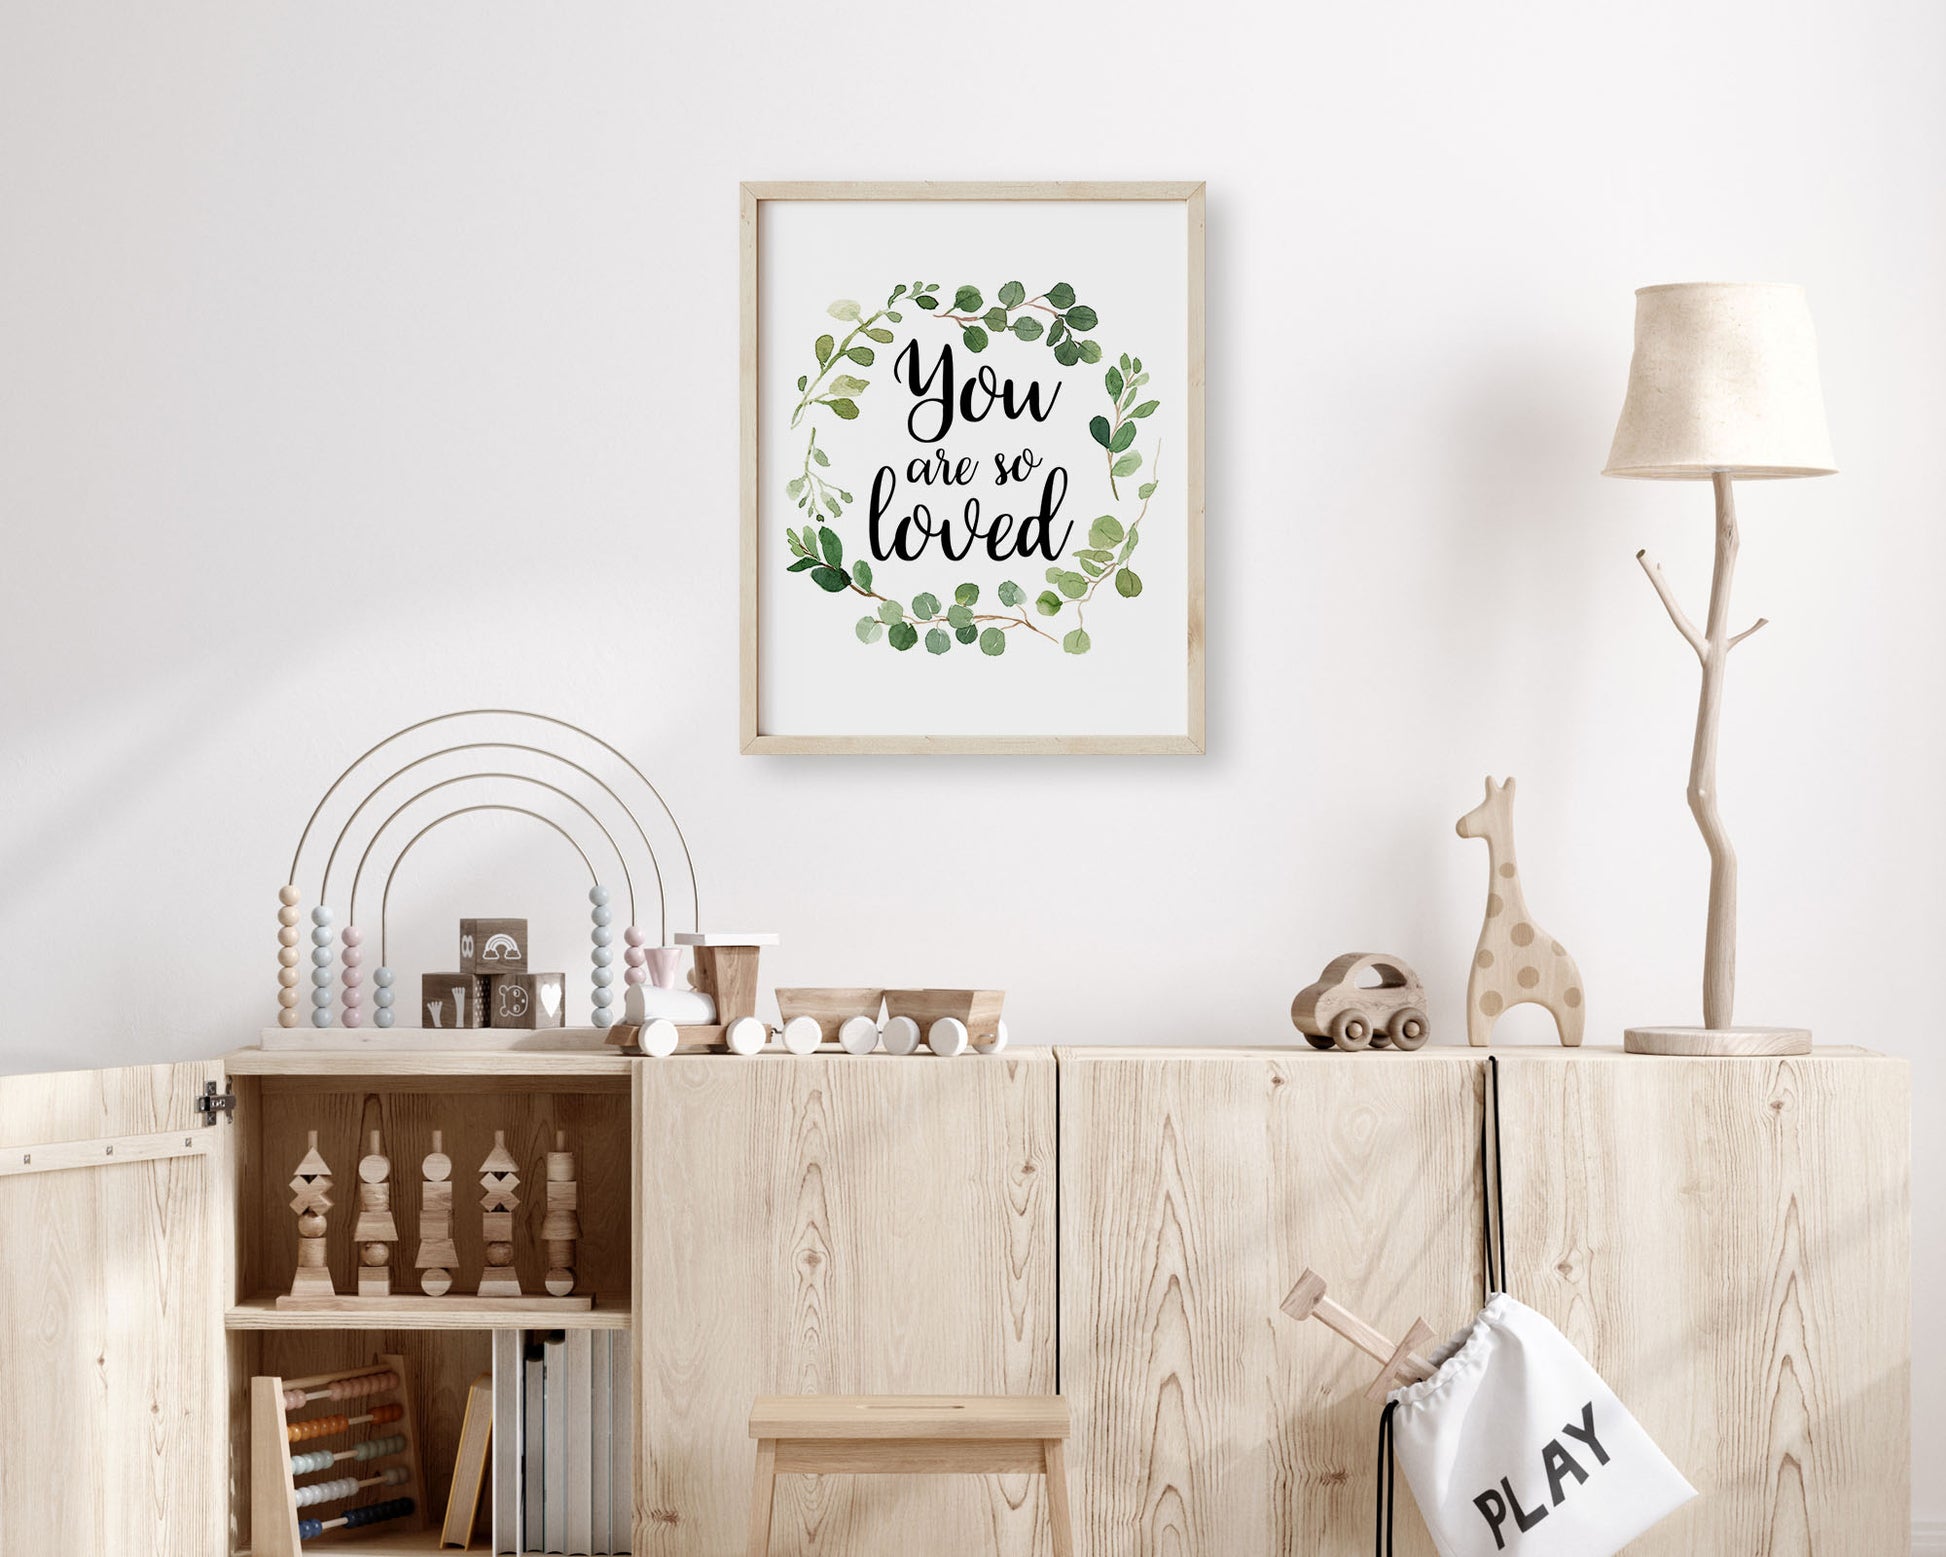 "You are so Loved" inspirational quote in cursive lettering inside a Watercolor Botanical Greenery Wreath Printable Wall Art. Great for Baby Boy or Baby Girl Nursery Decor or Kids Room Wall Hangings.